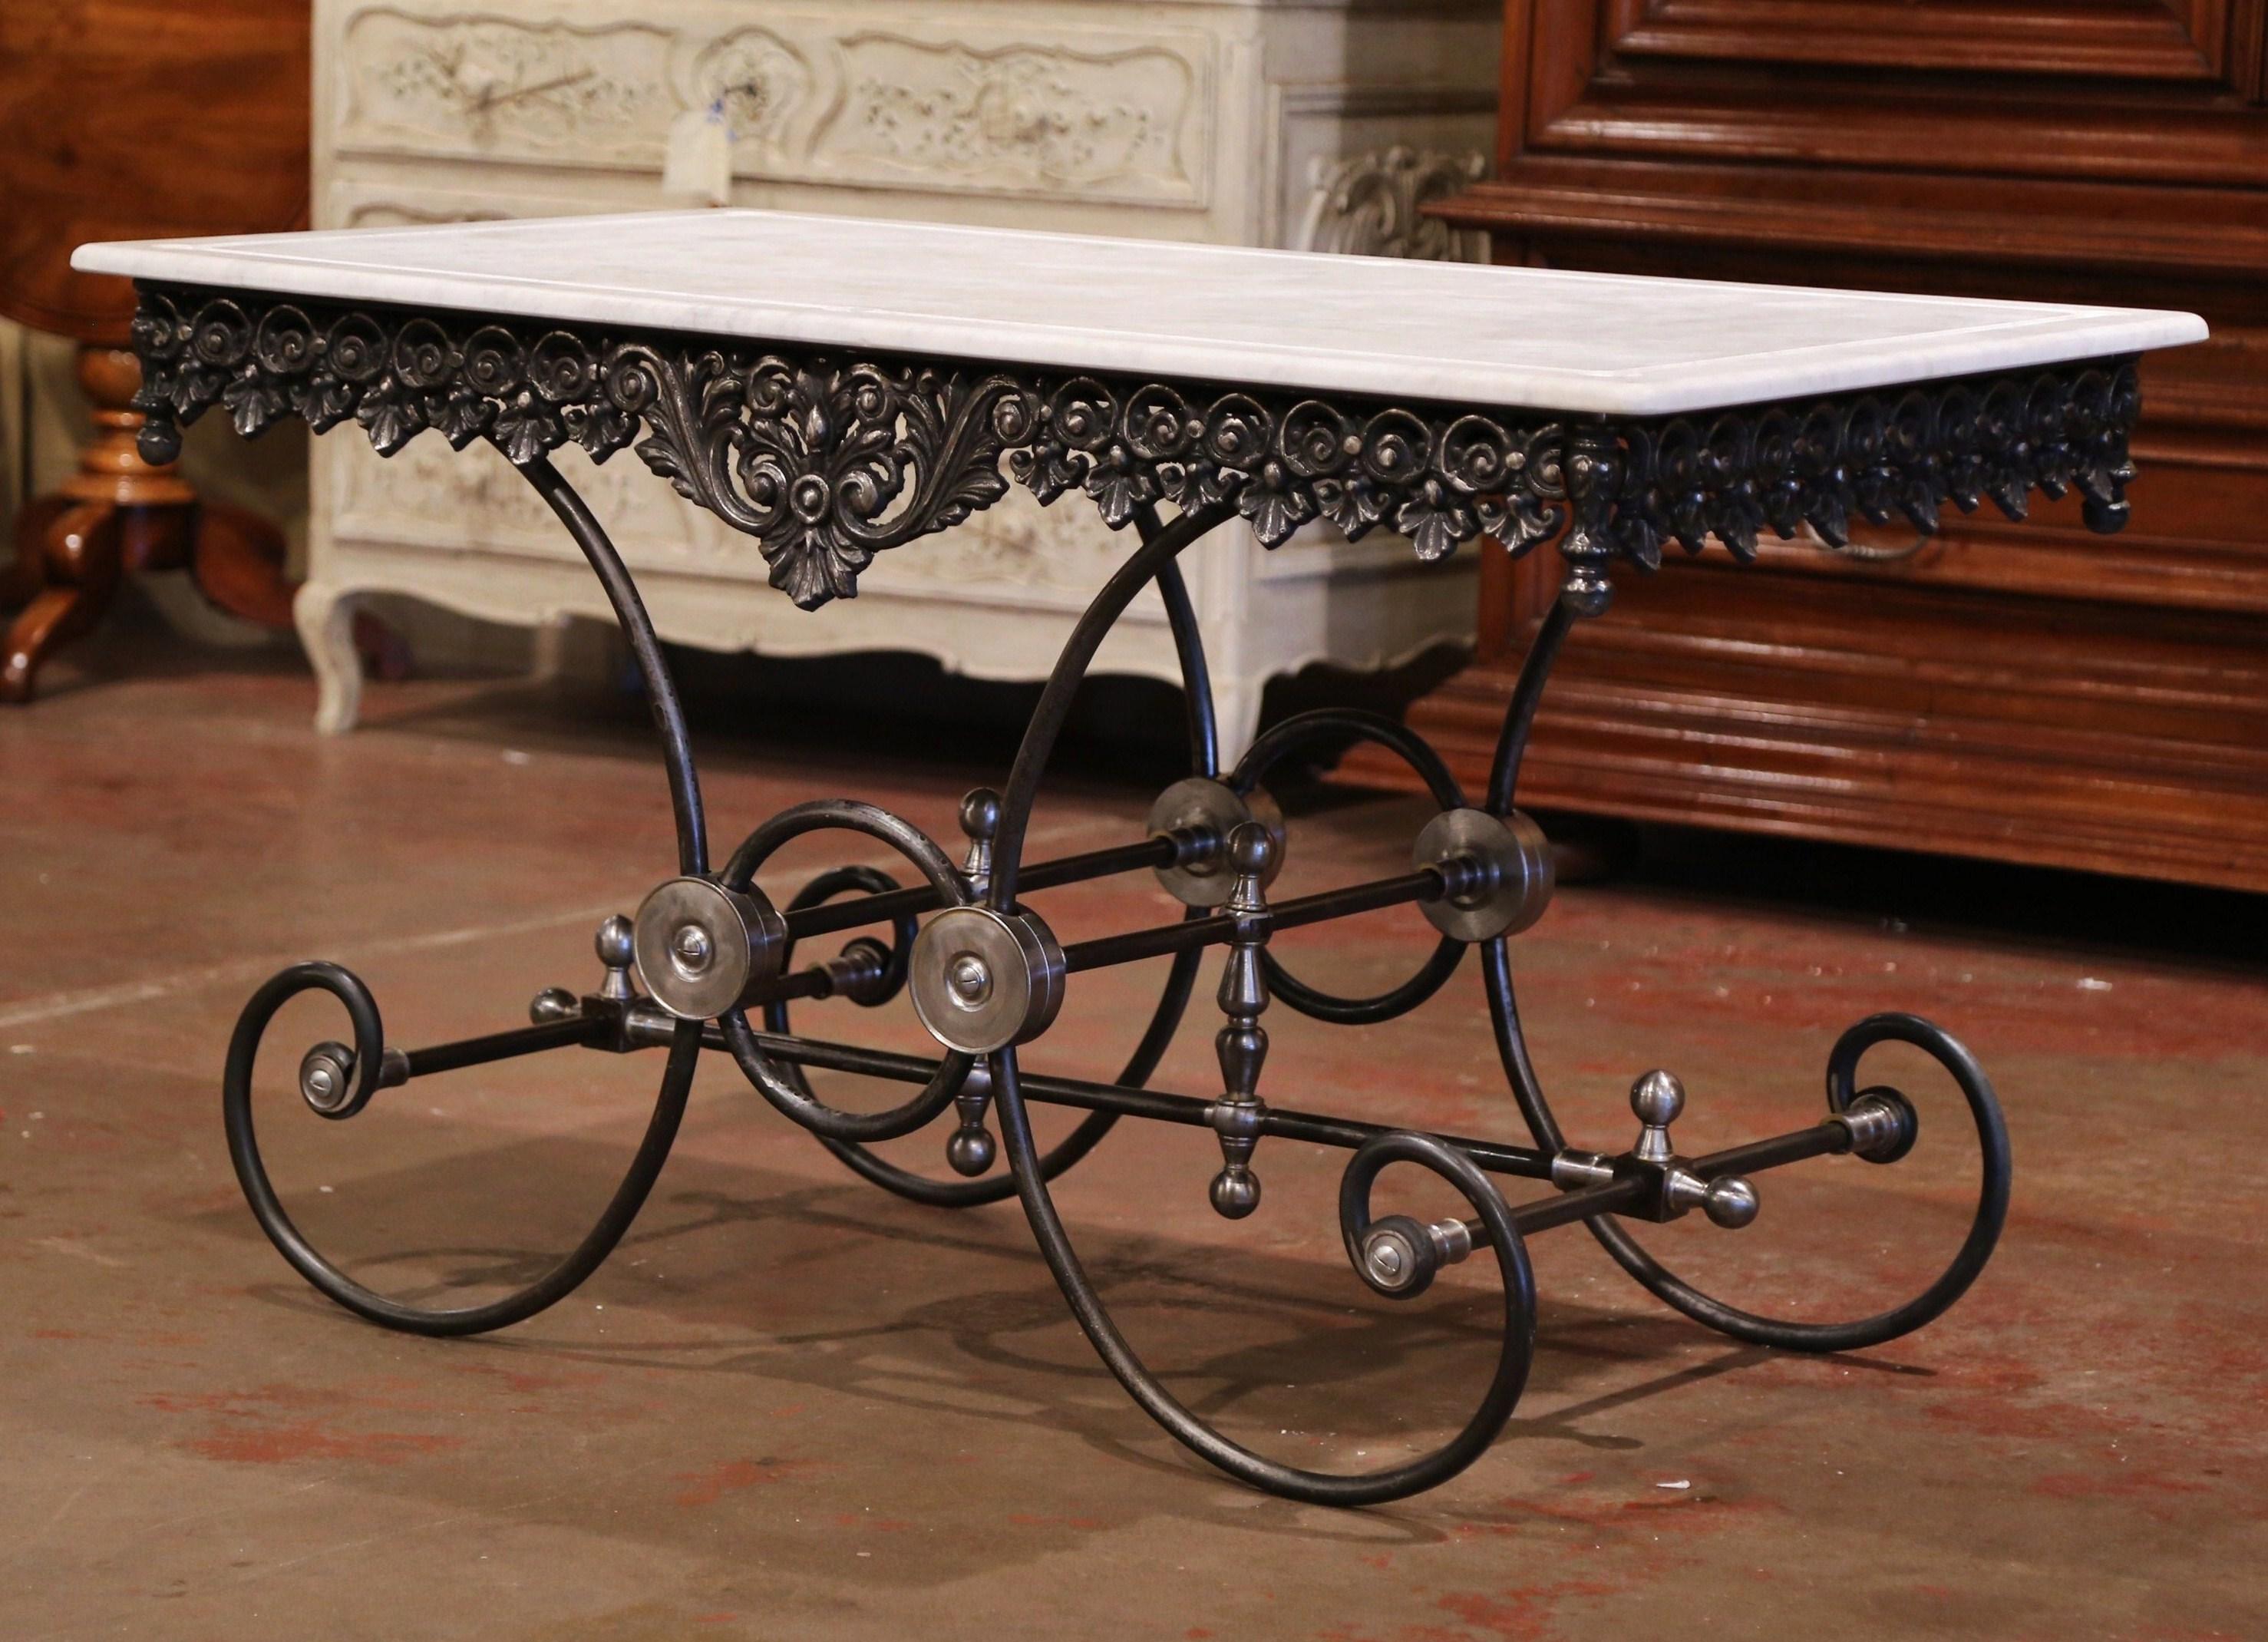 Contemporary French Polished Iron Butcher or Pastry Table with White Marble Top